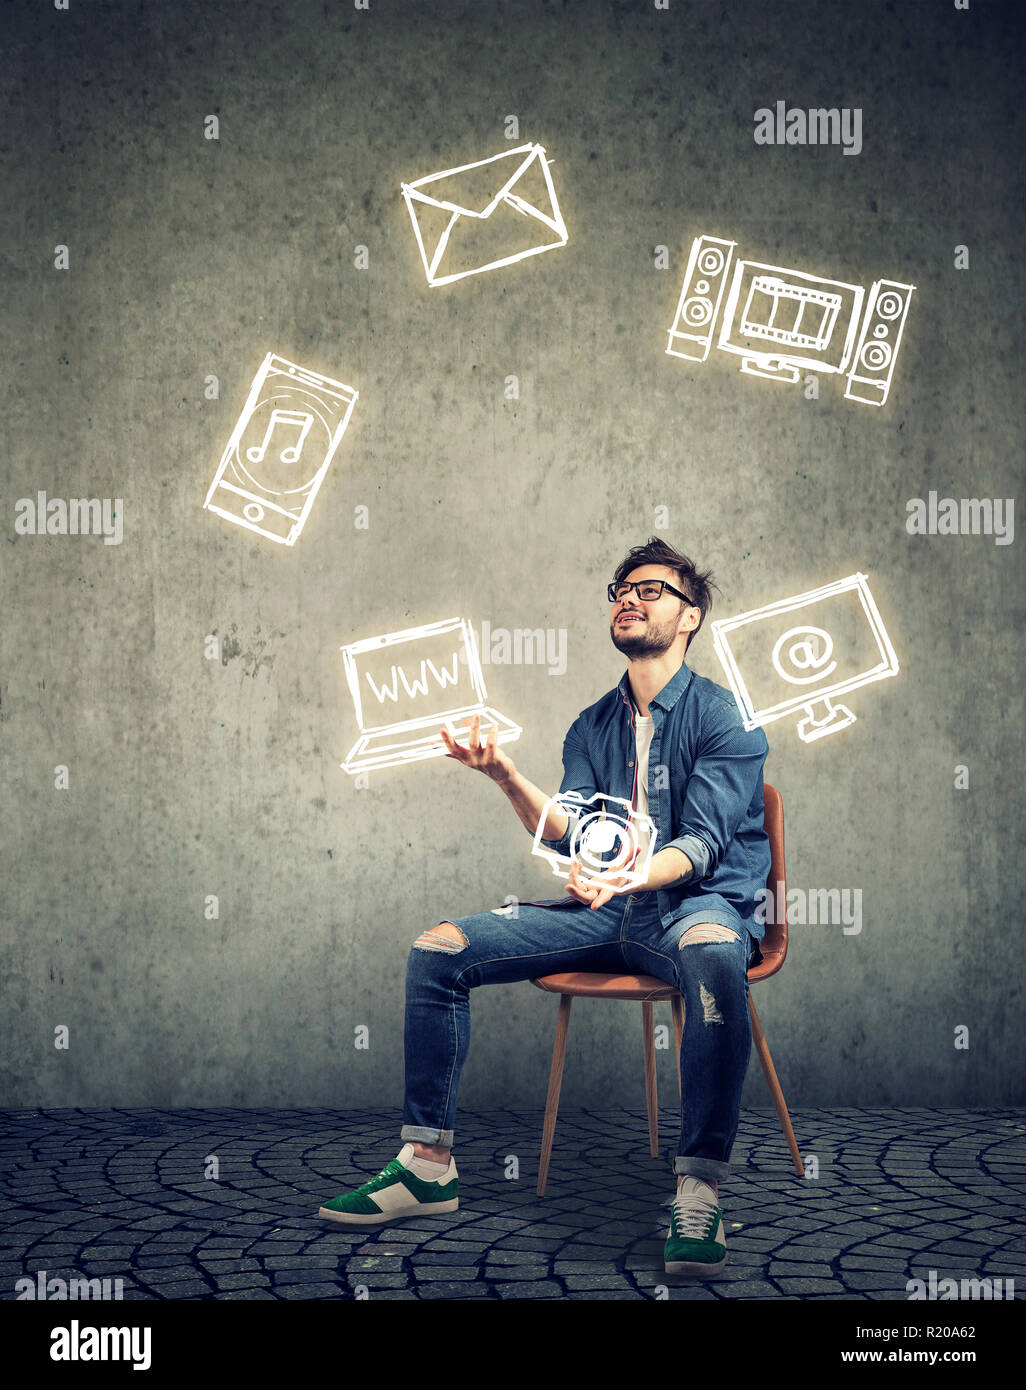 Funny skillful man sitting on chair and juggling with electronic devices icons Stock Photo